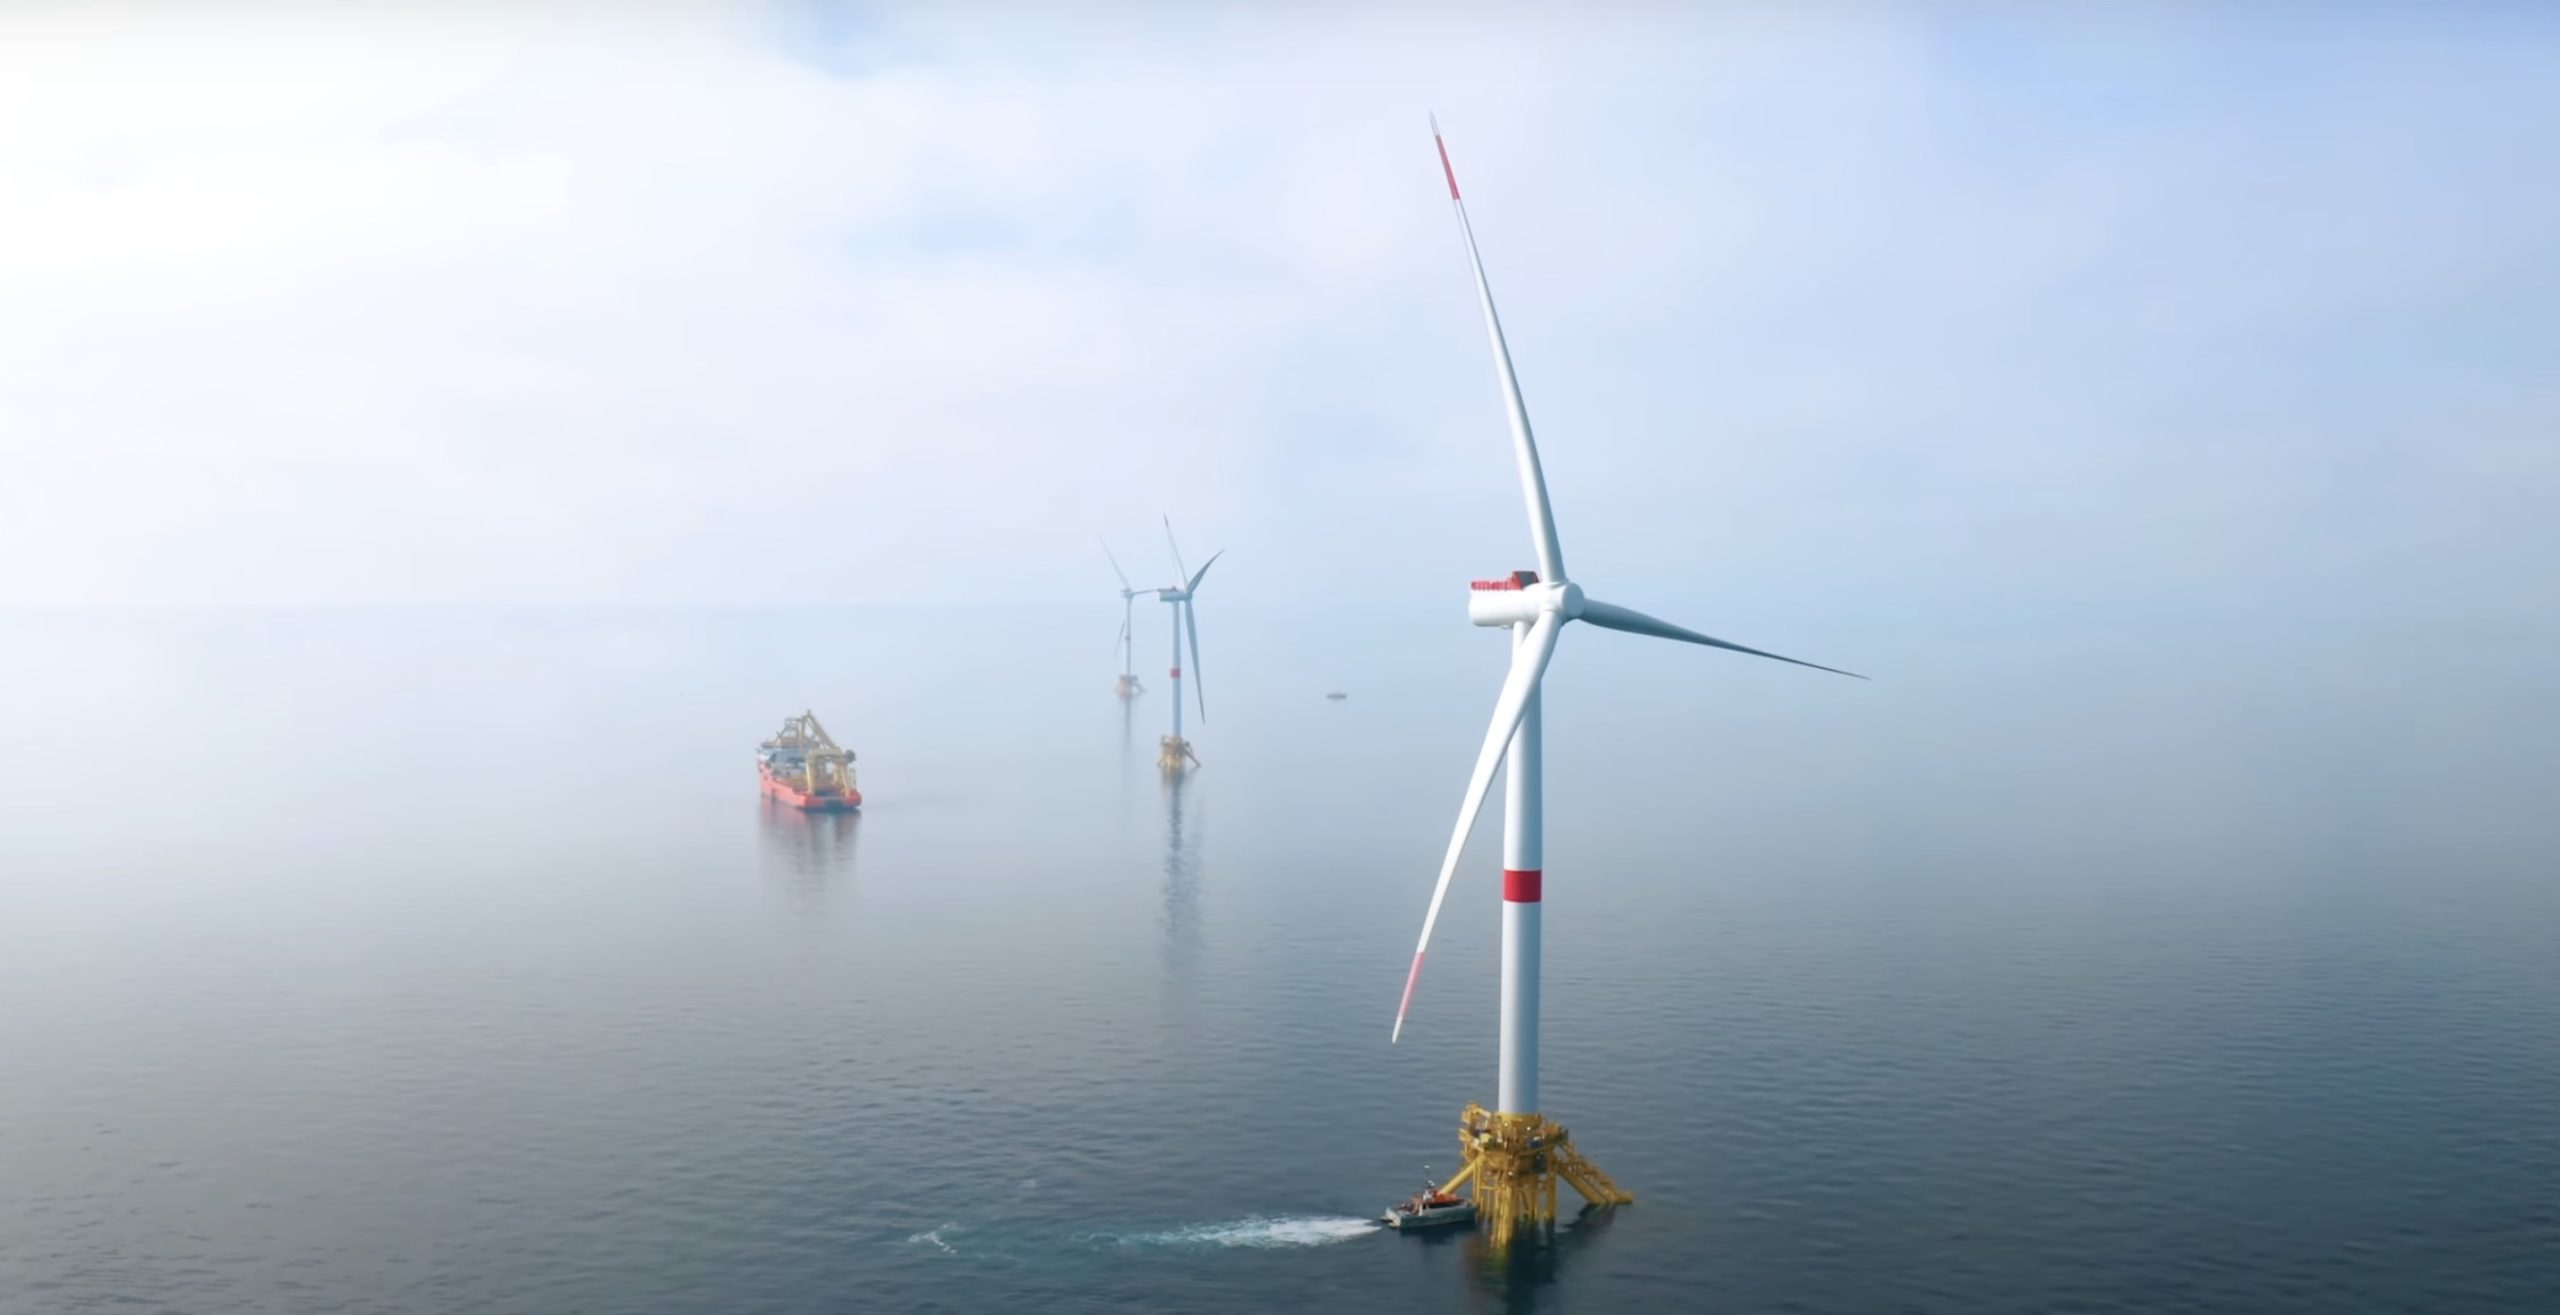 SBM Offshore selected Cranemaster when installing floating wind turbines